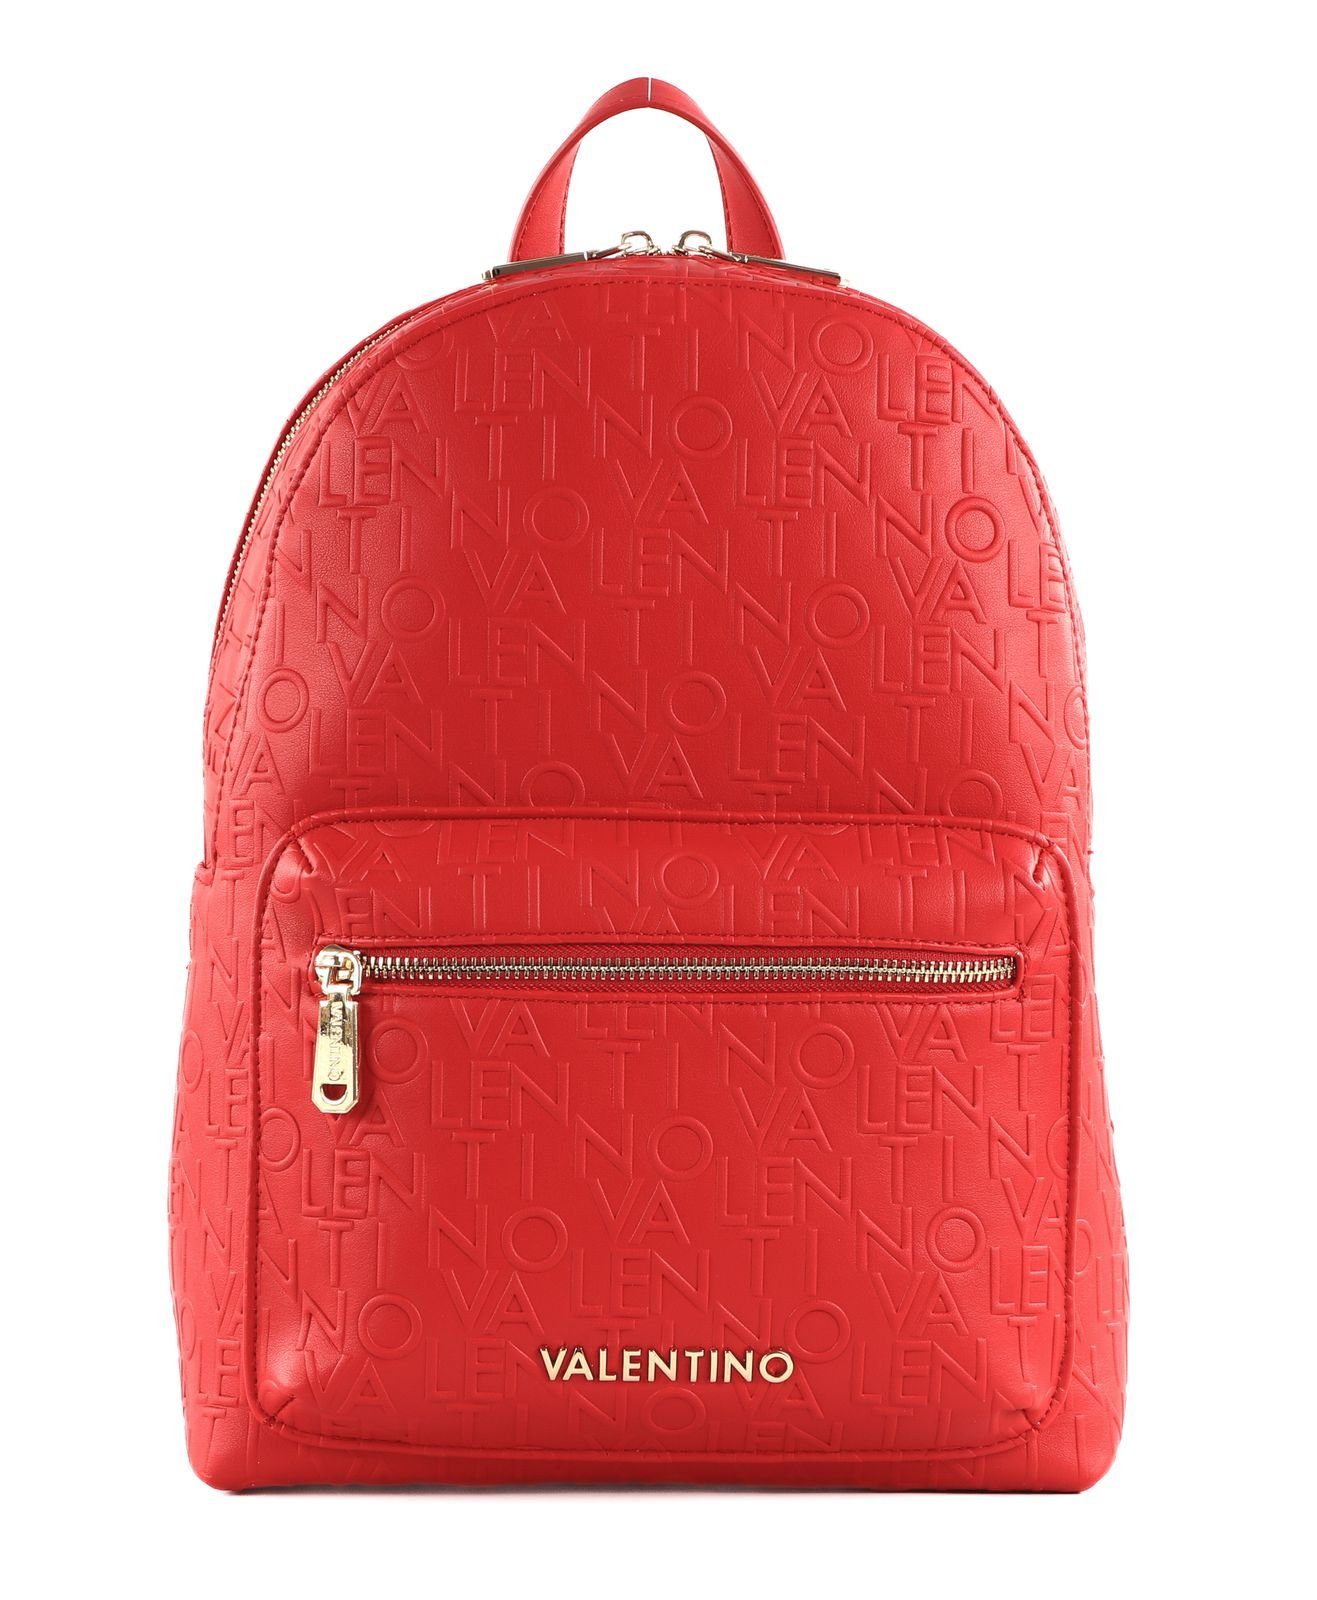 Rucksack VALENTINO Rosso Relax BAGS